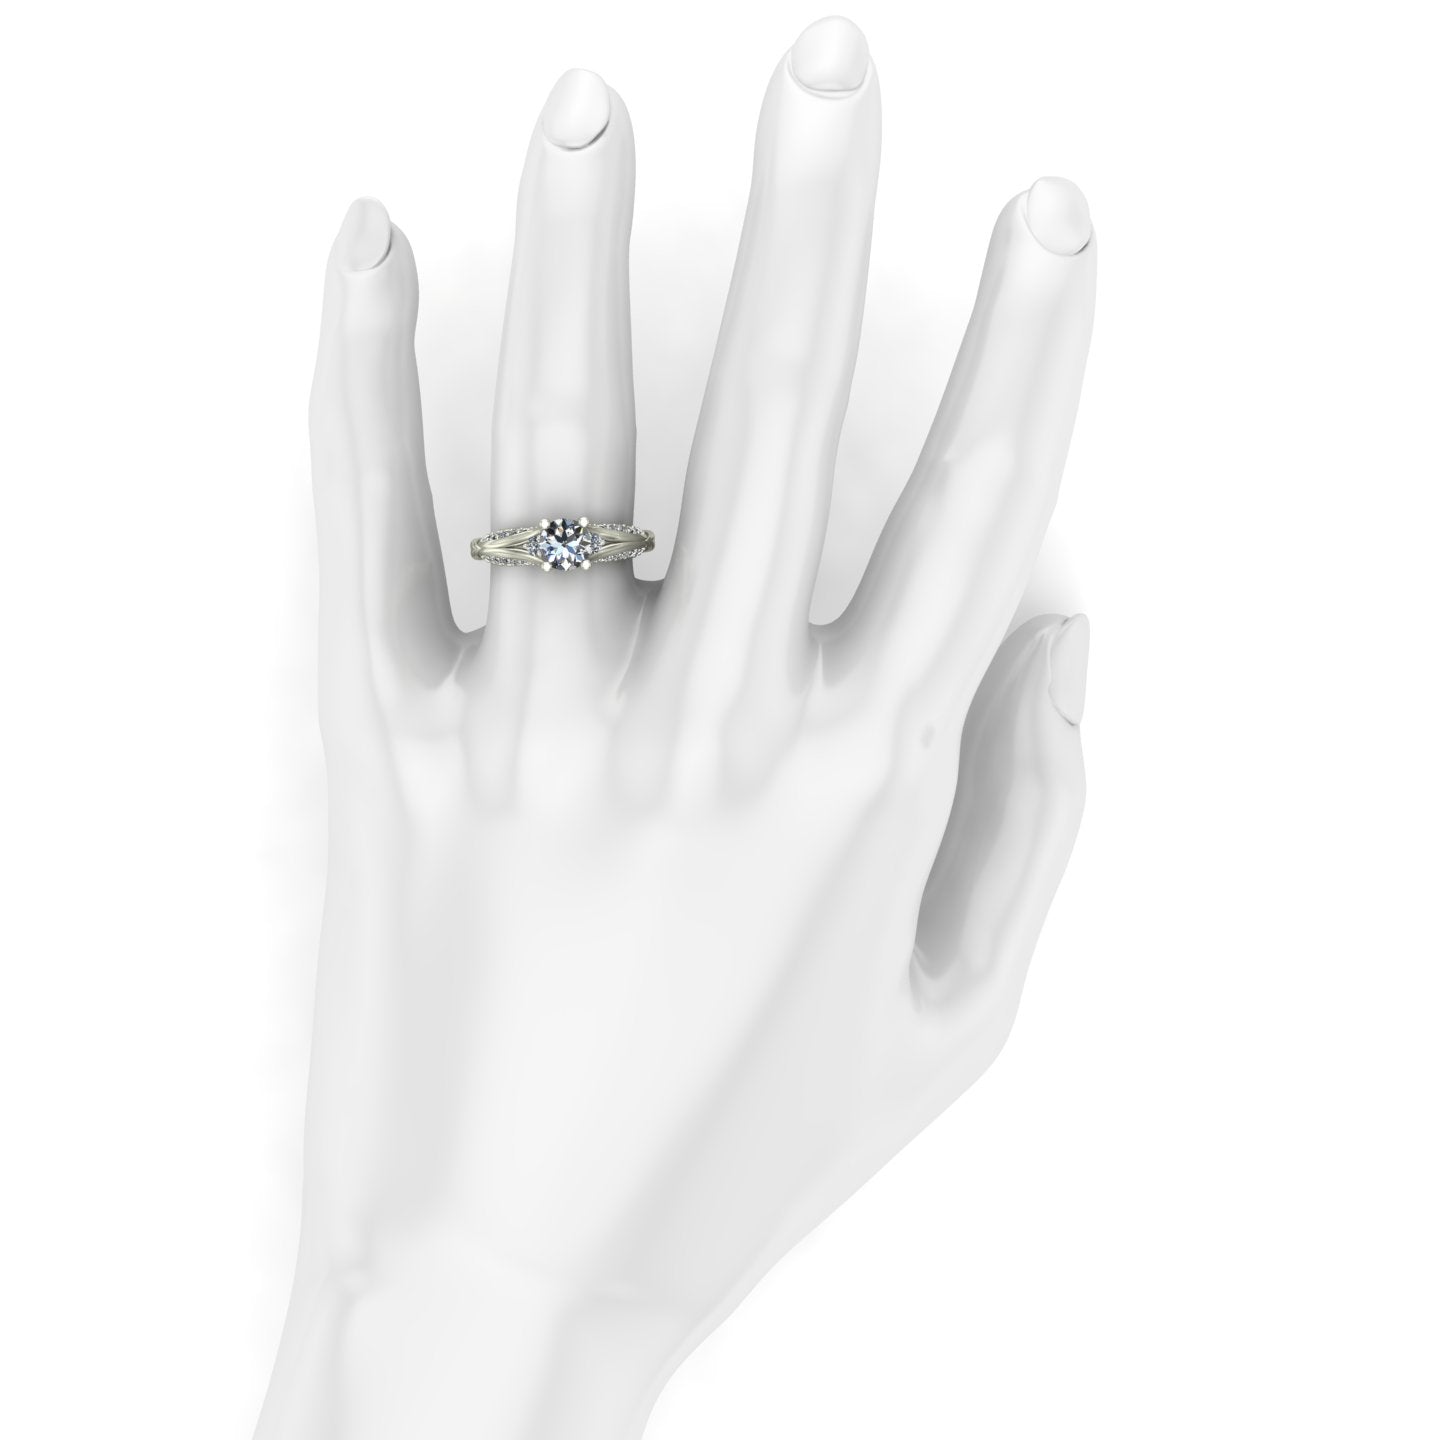 three quarter carat diamond solitaire engagement ring in 14k white gold - Charles Babb Designs - on hand